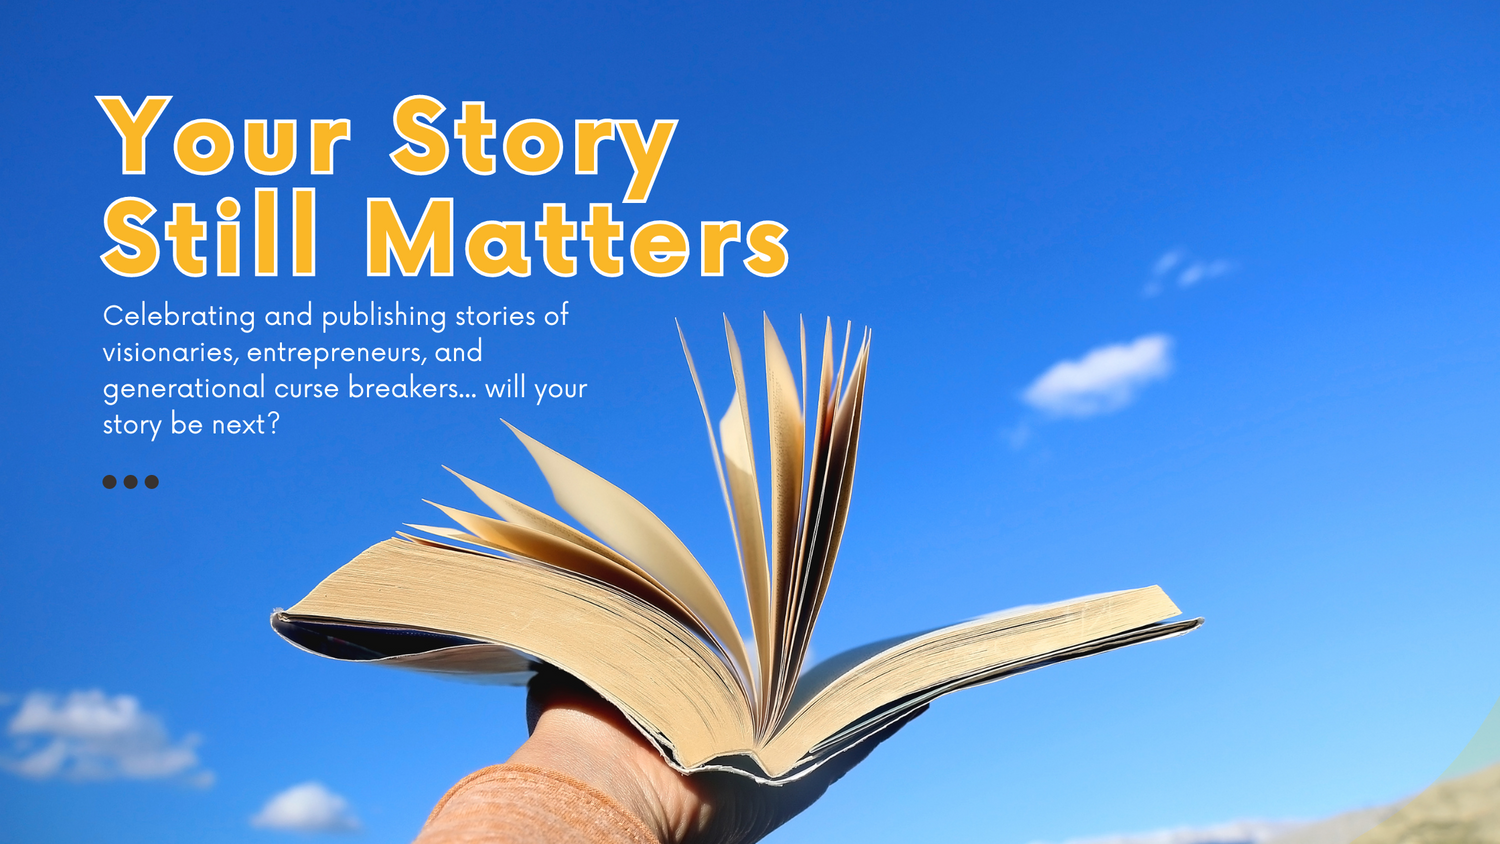 Because Your Story Still Matters....